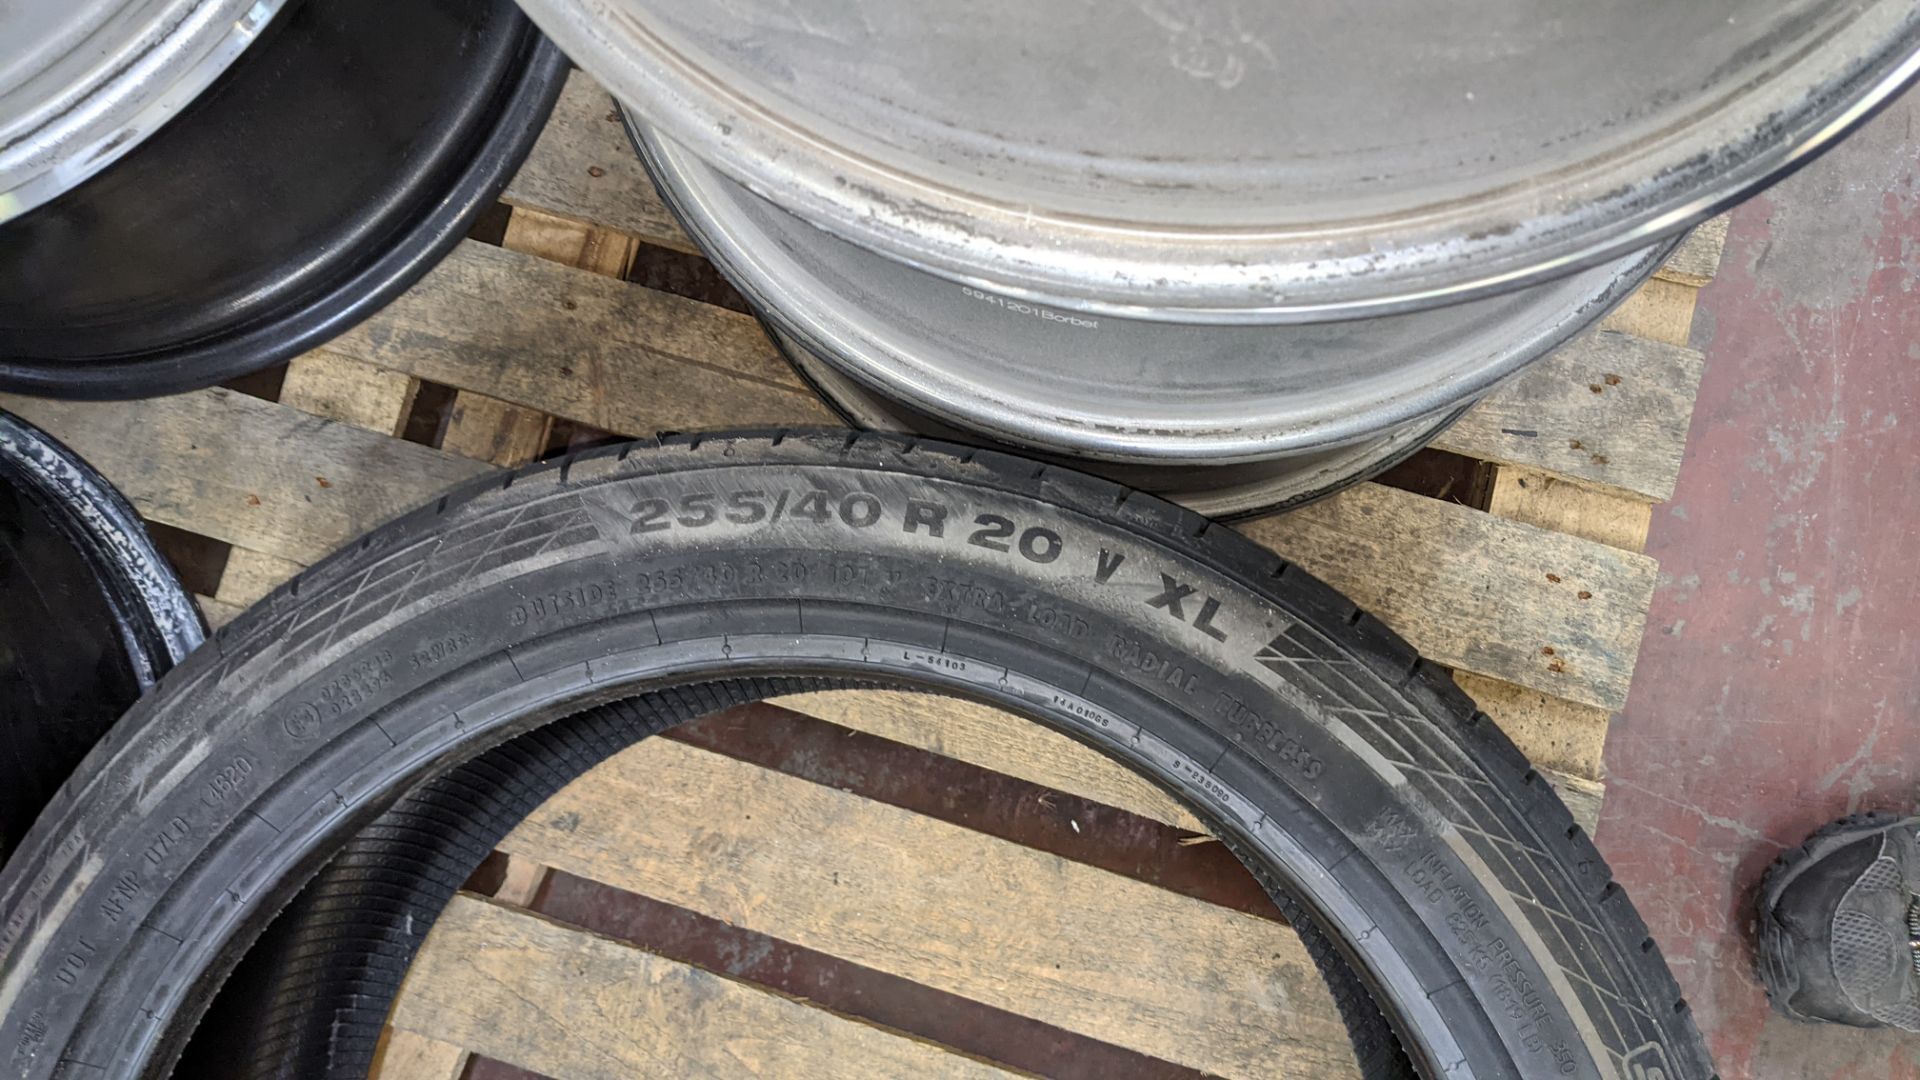 Continental Sport Contact 5 SUV tyre, appears to be new & unused, size 255/40 R 20XL 101V - Image 4 of 9